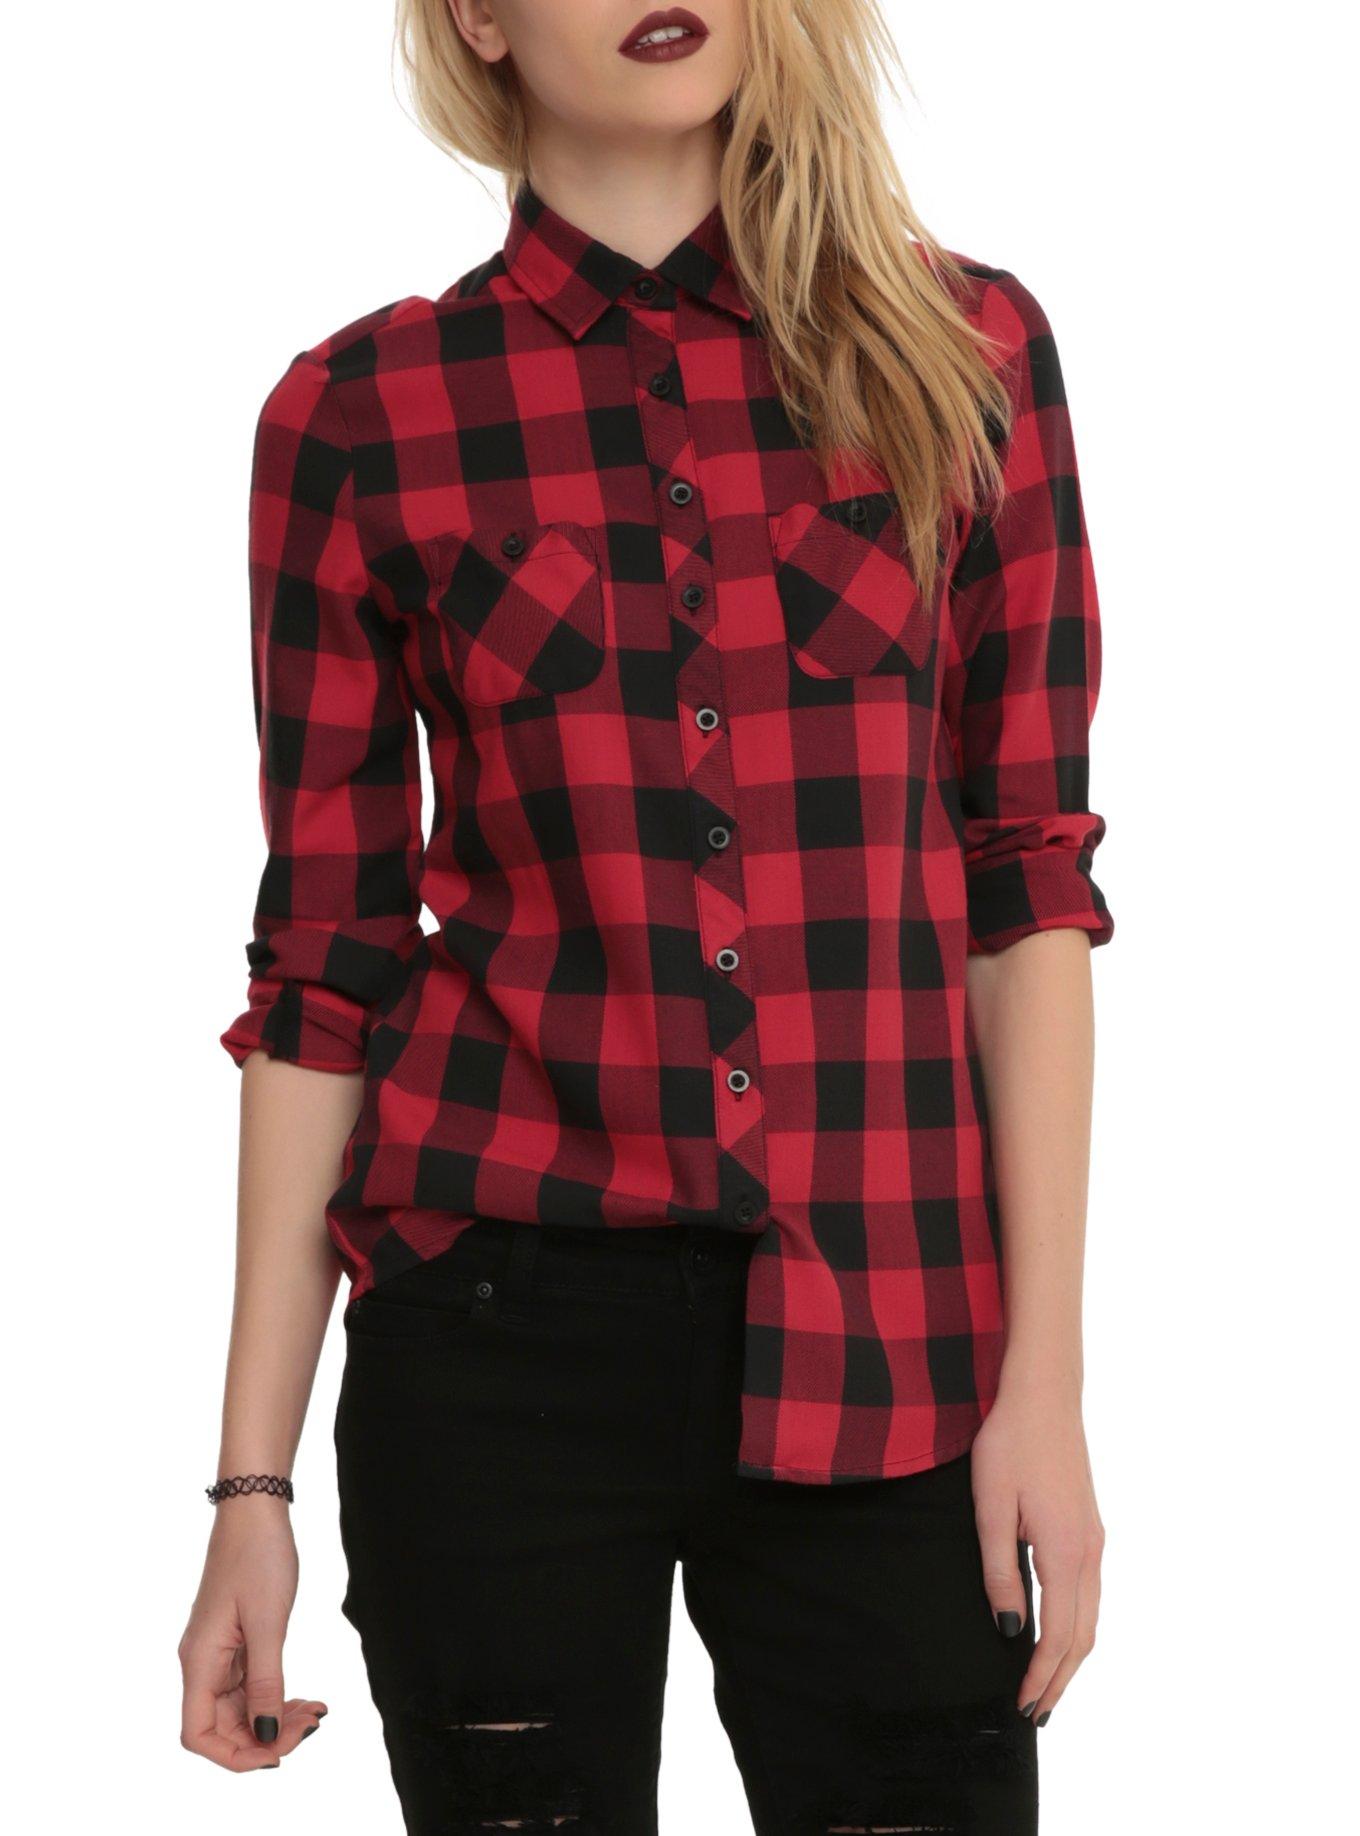 Black And Red Plaid Girls Woven Button-Up, RED, hi-res